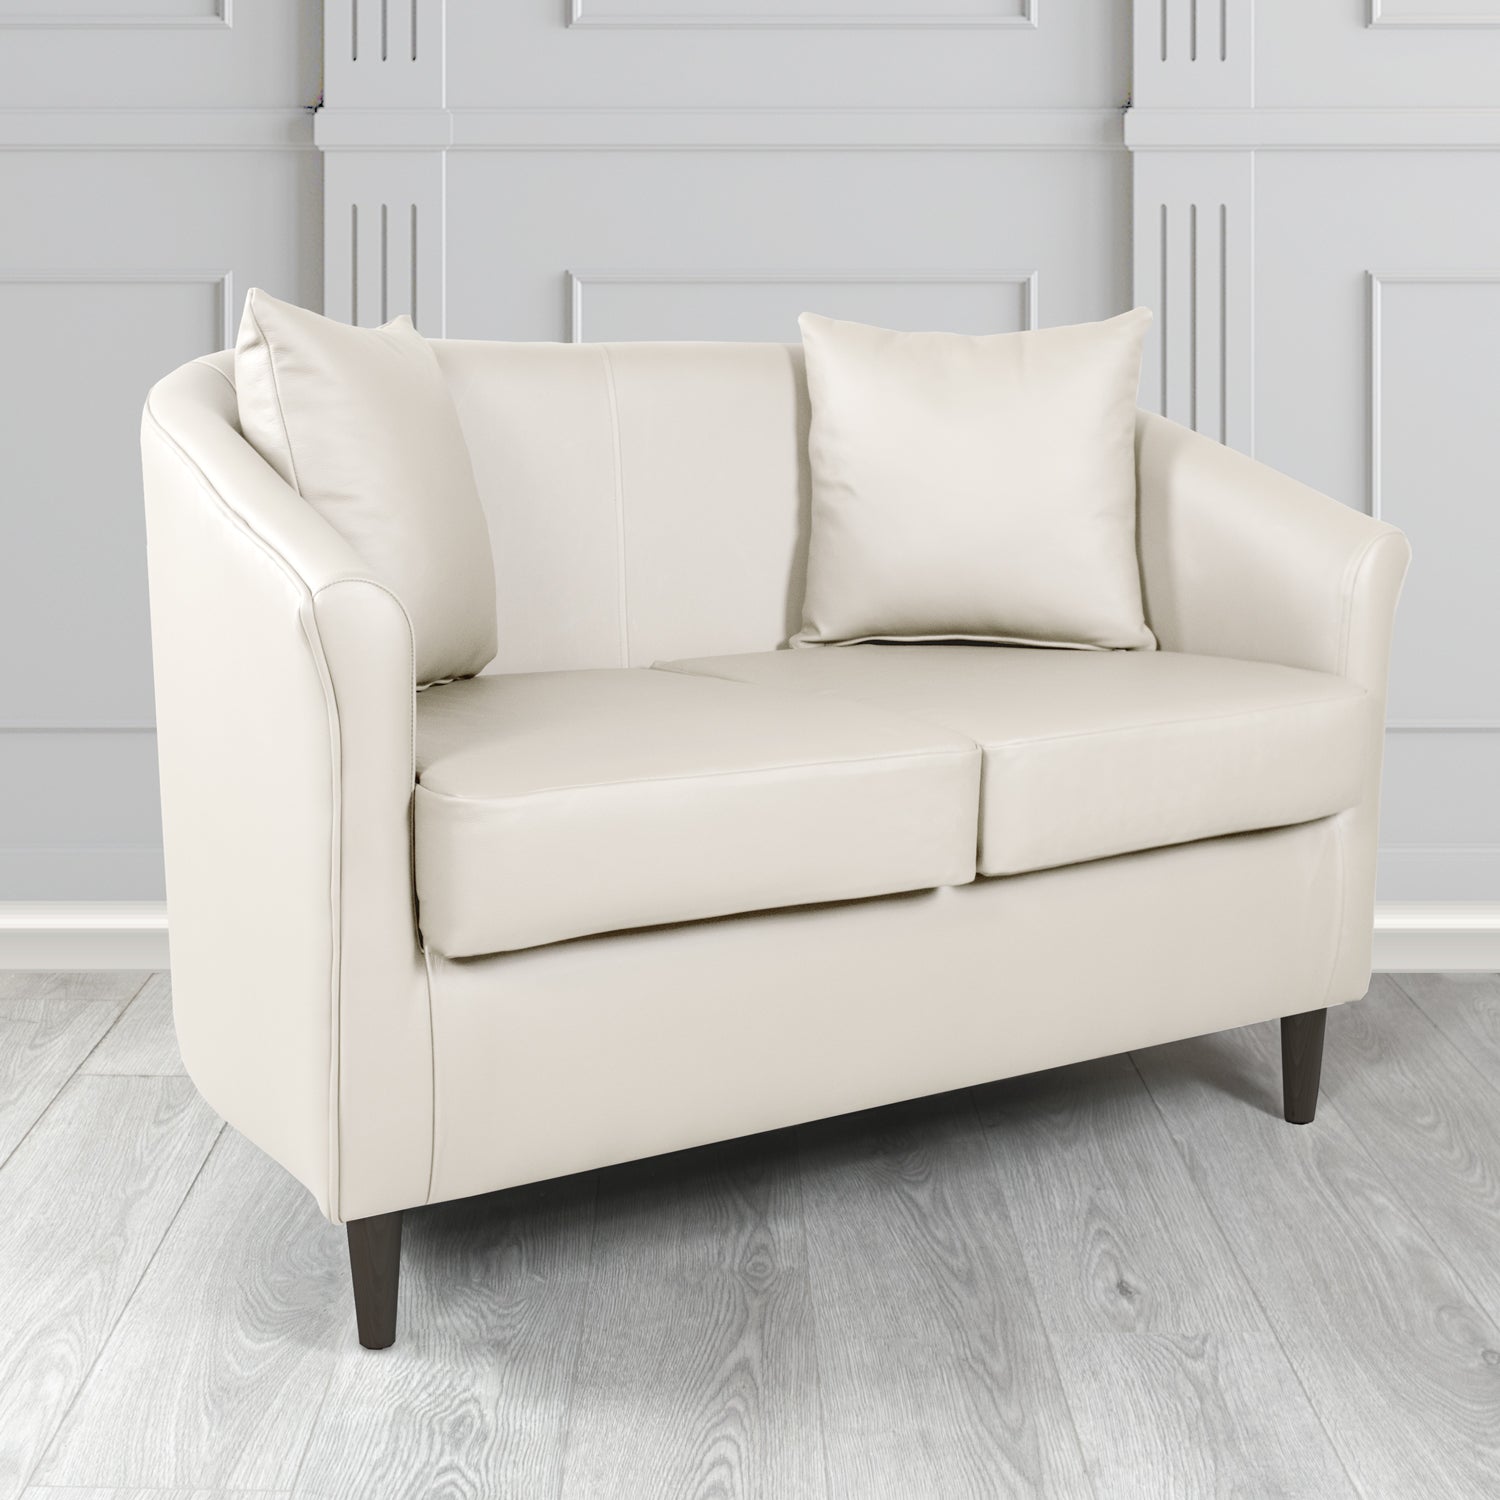 St Tropez Shelly White Crib 5 Genuine Leather 2 Seater Tub Sofa with Scatter Cushions - The Tub Chair Shop